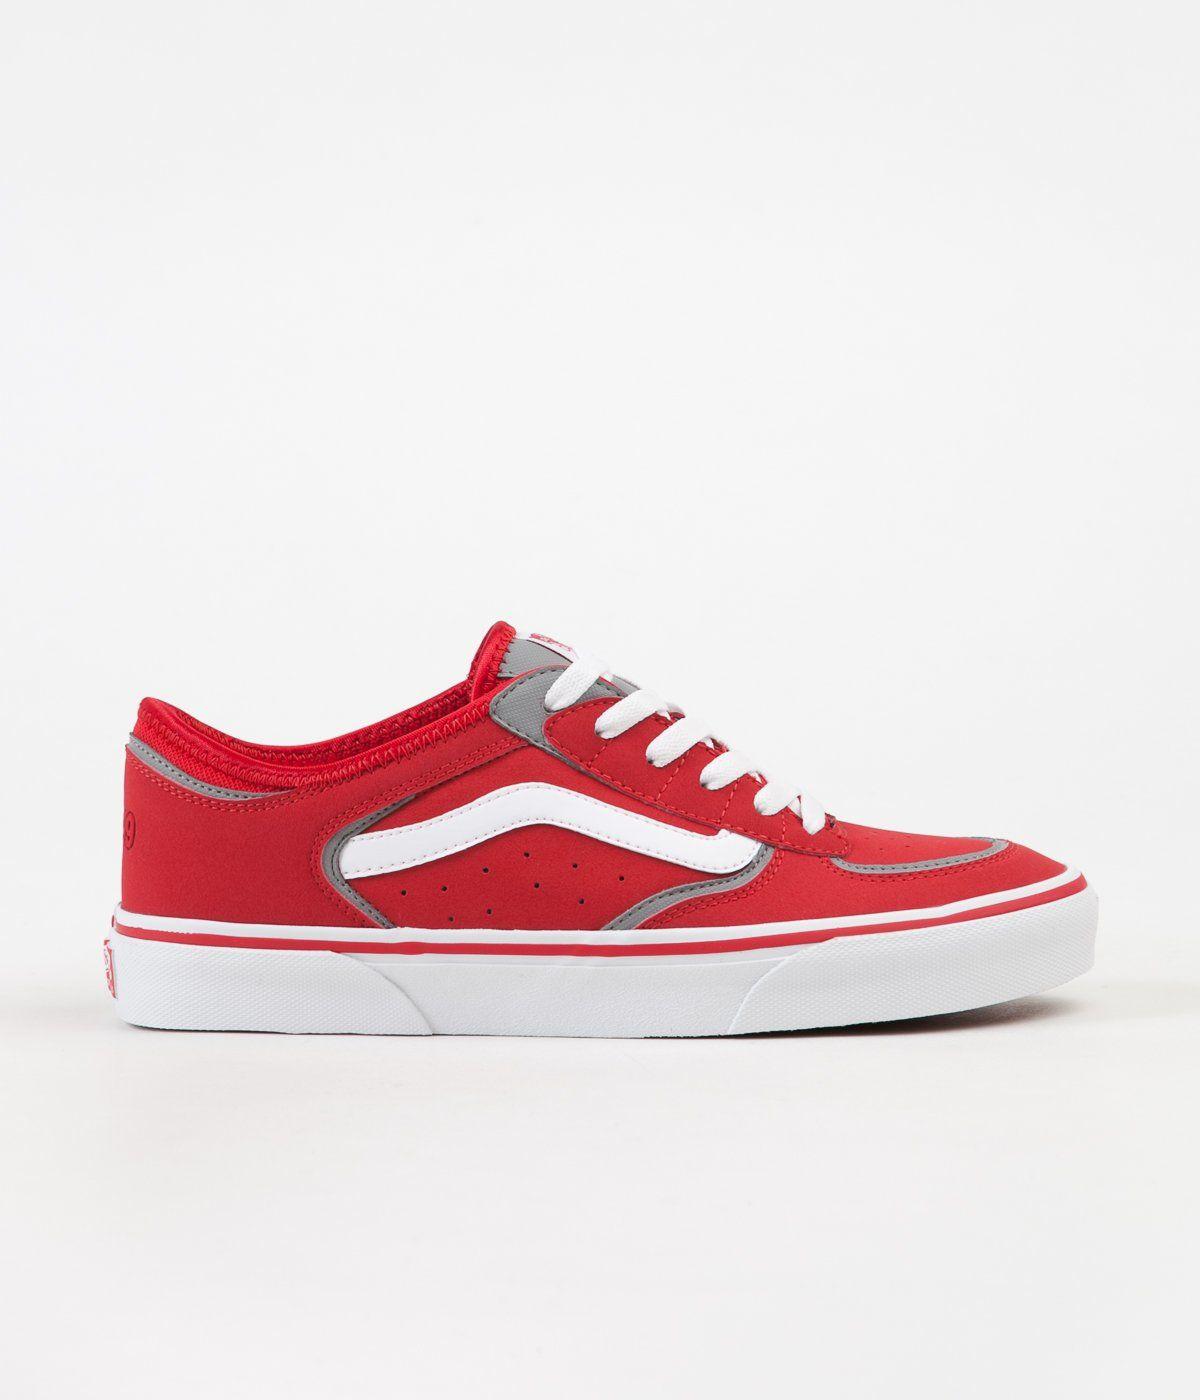 Red White Vans Logo - Vans Rowley Classic LX Shoes - Racing Red / White | Flatspot